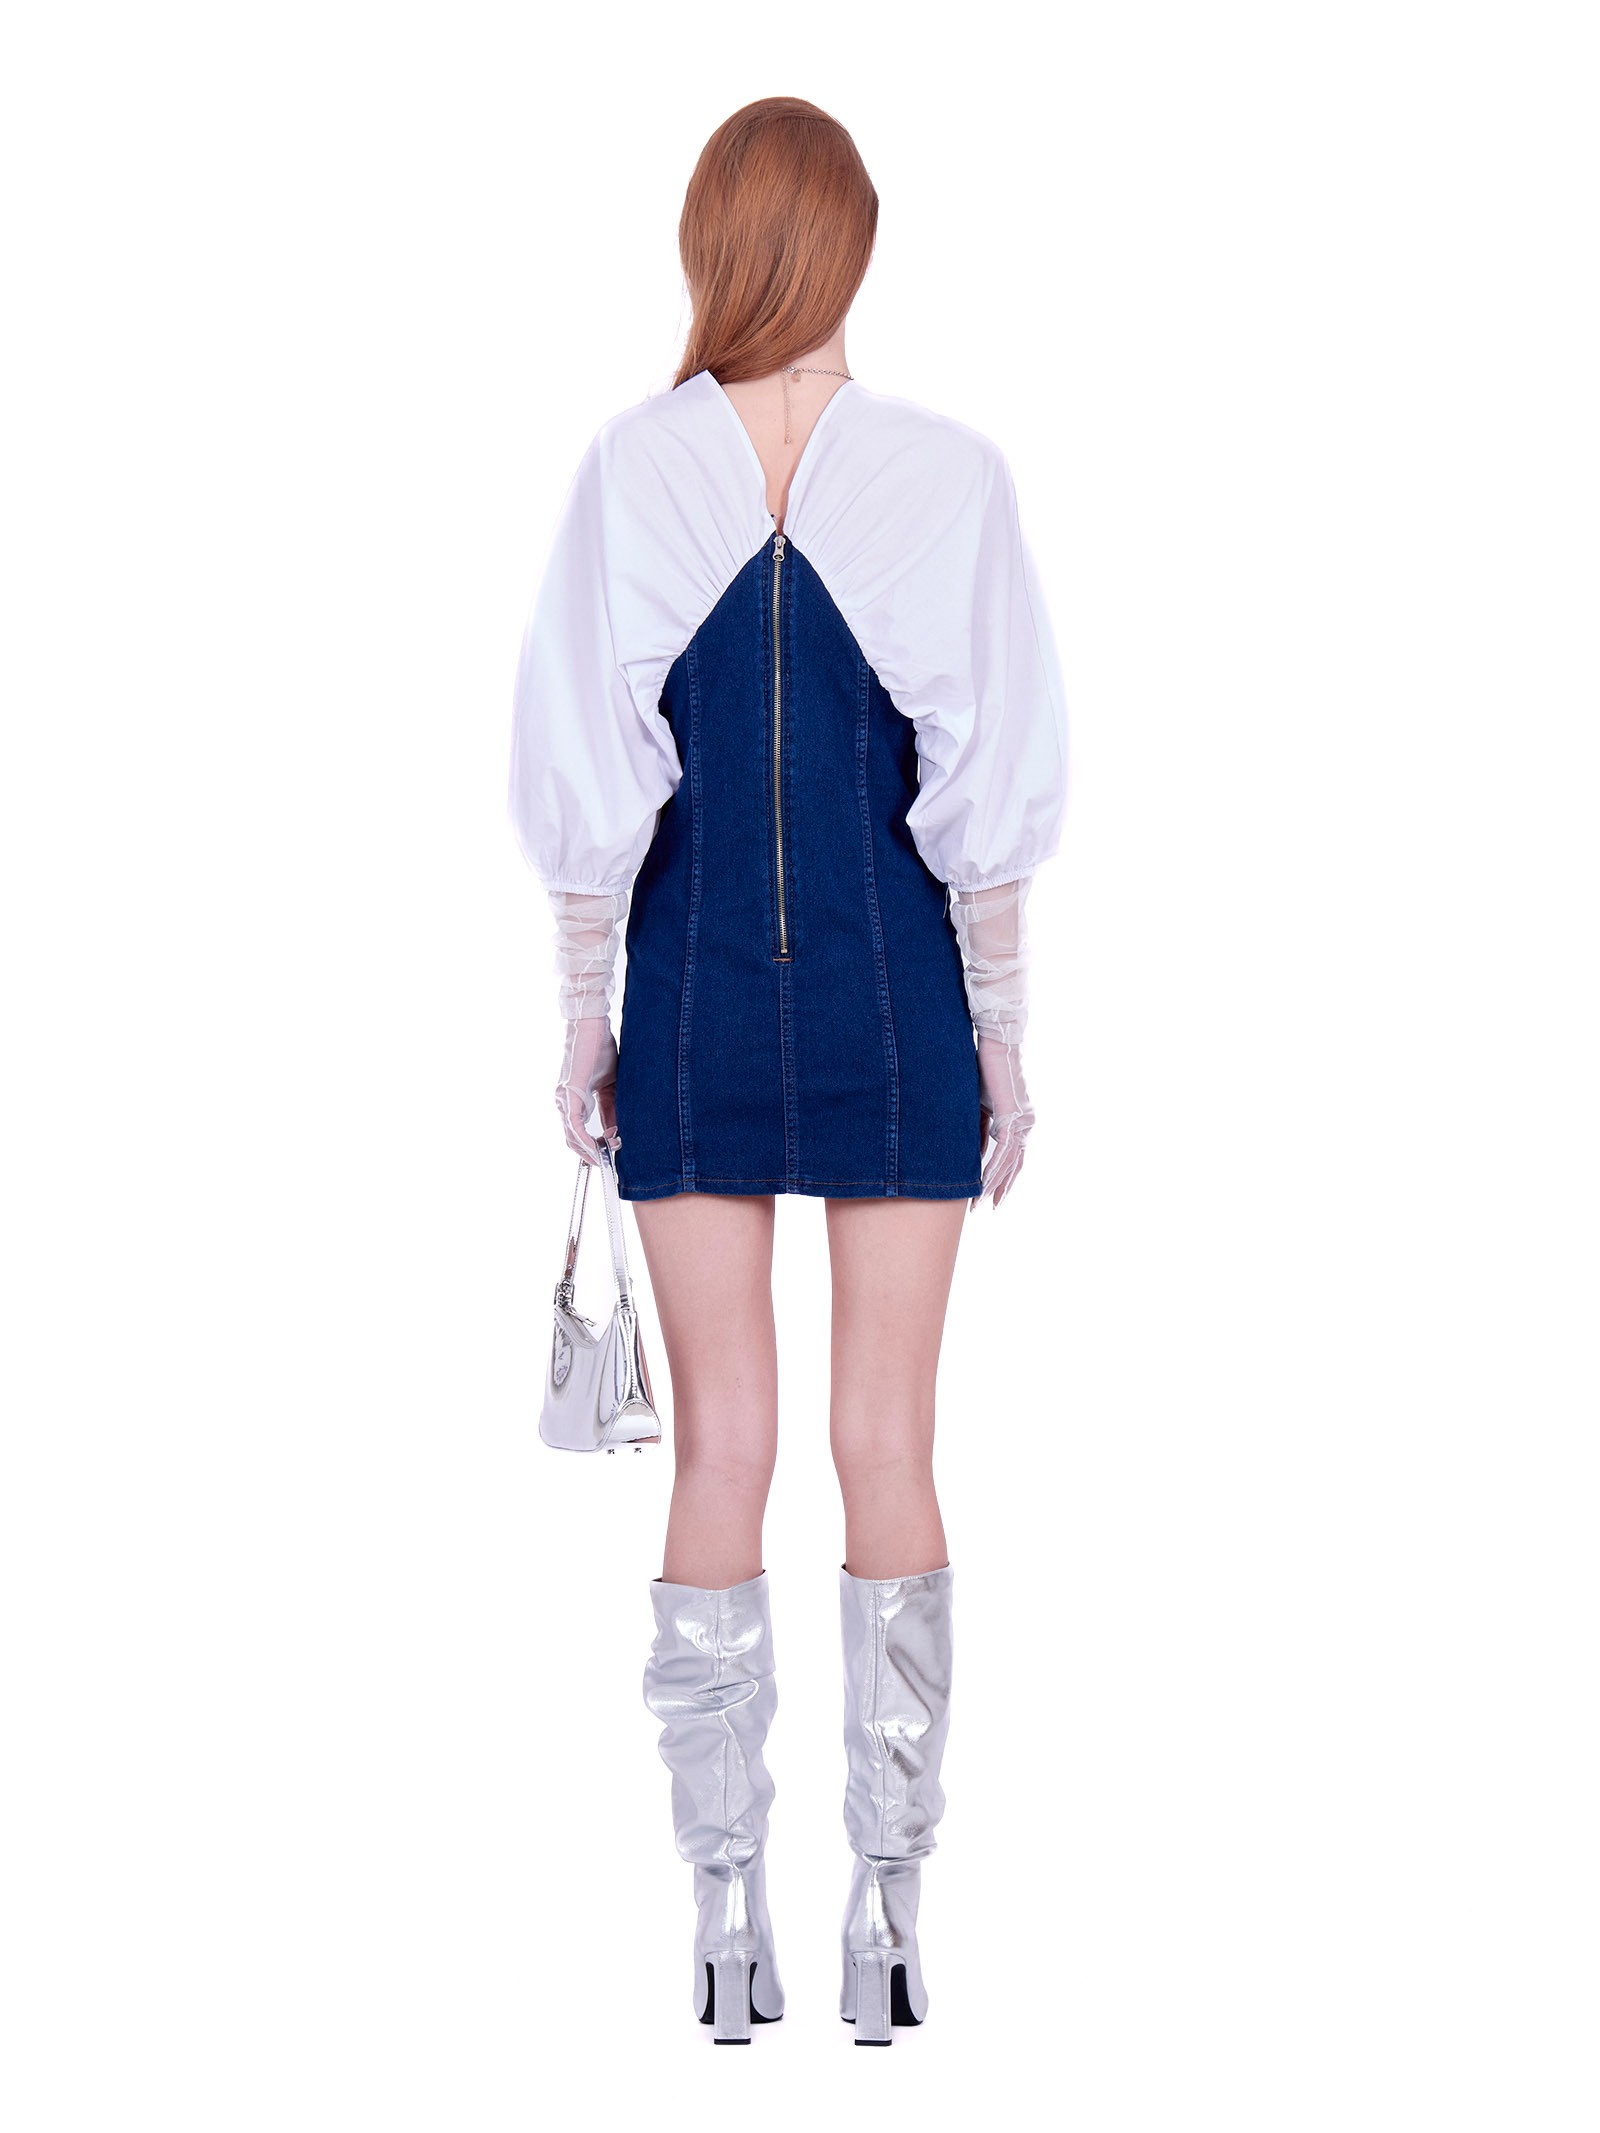 Two textured Dress cotton and denim White Blue